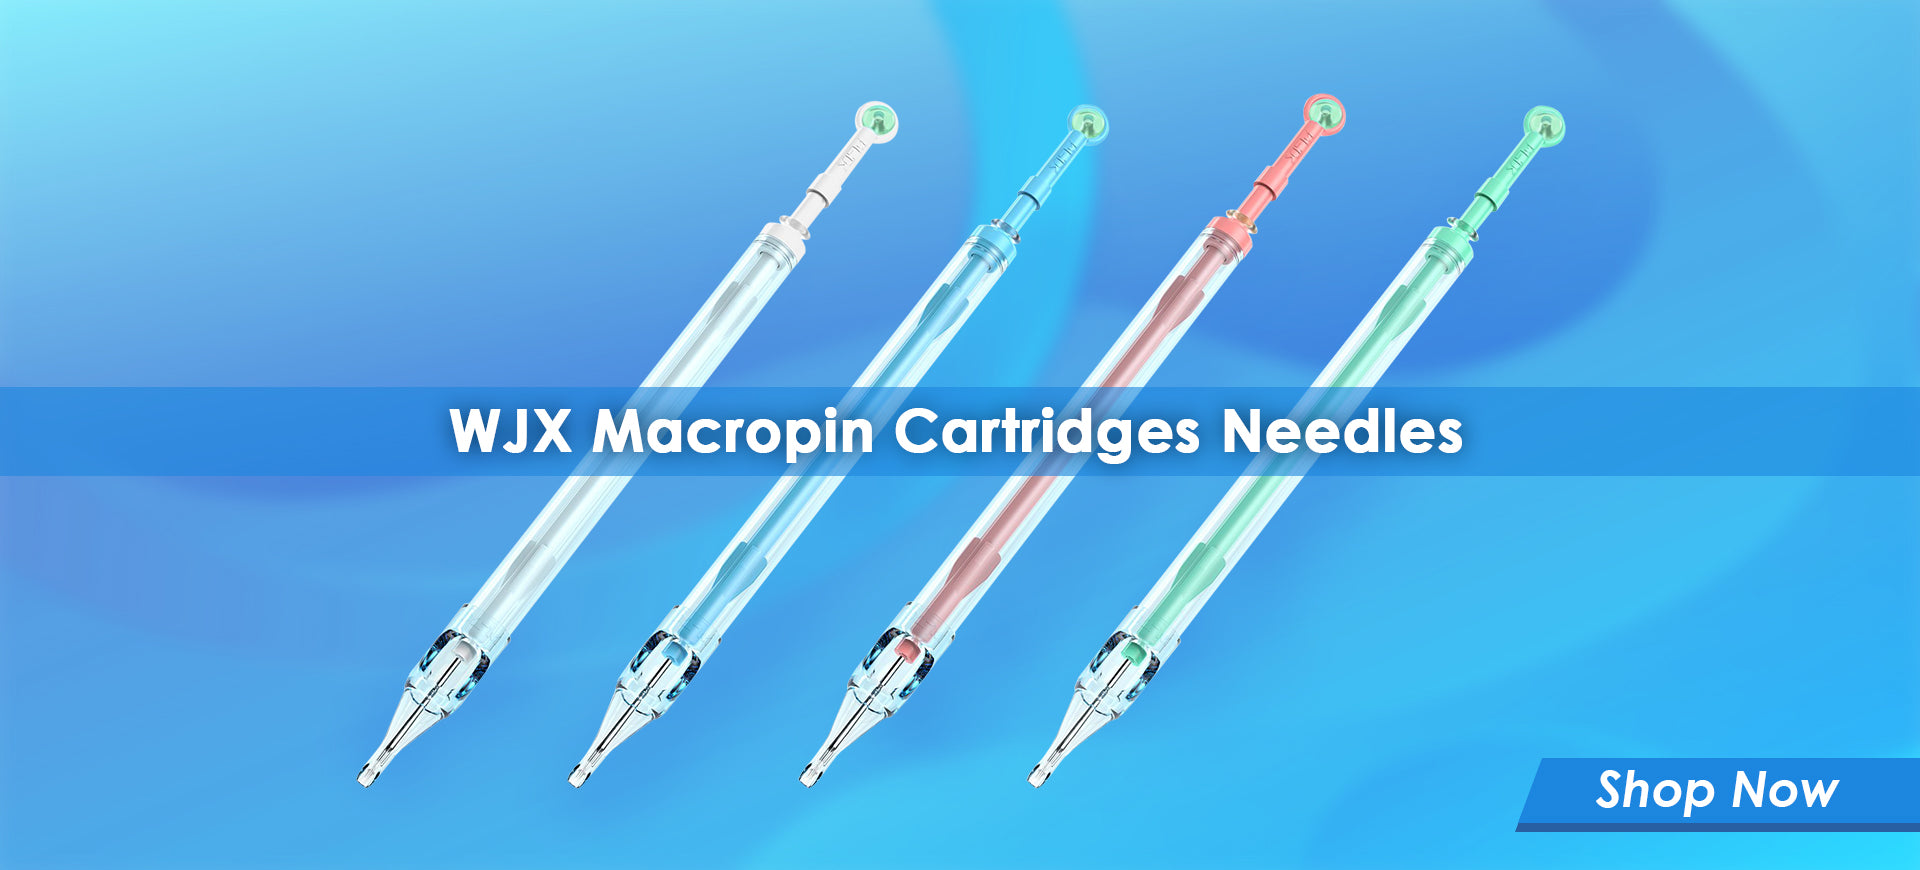 What's WJX Macropin Cartridge Needles? | Complete Guide